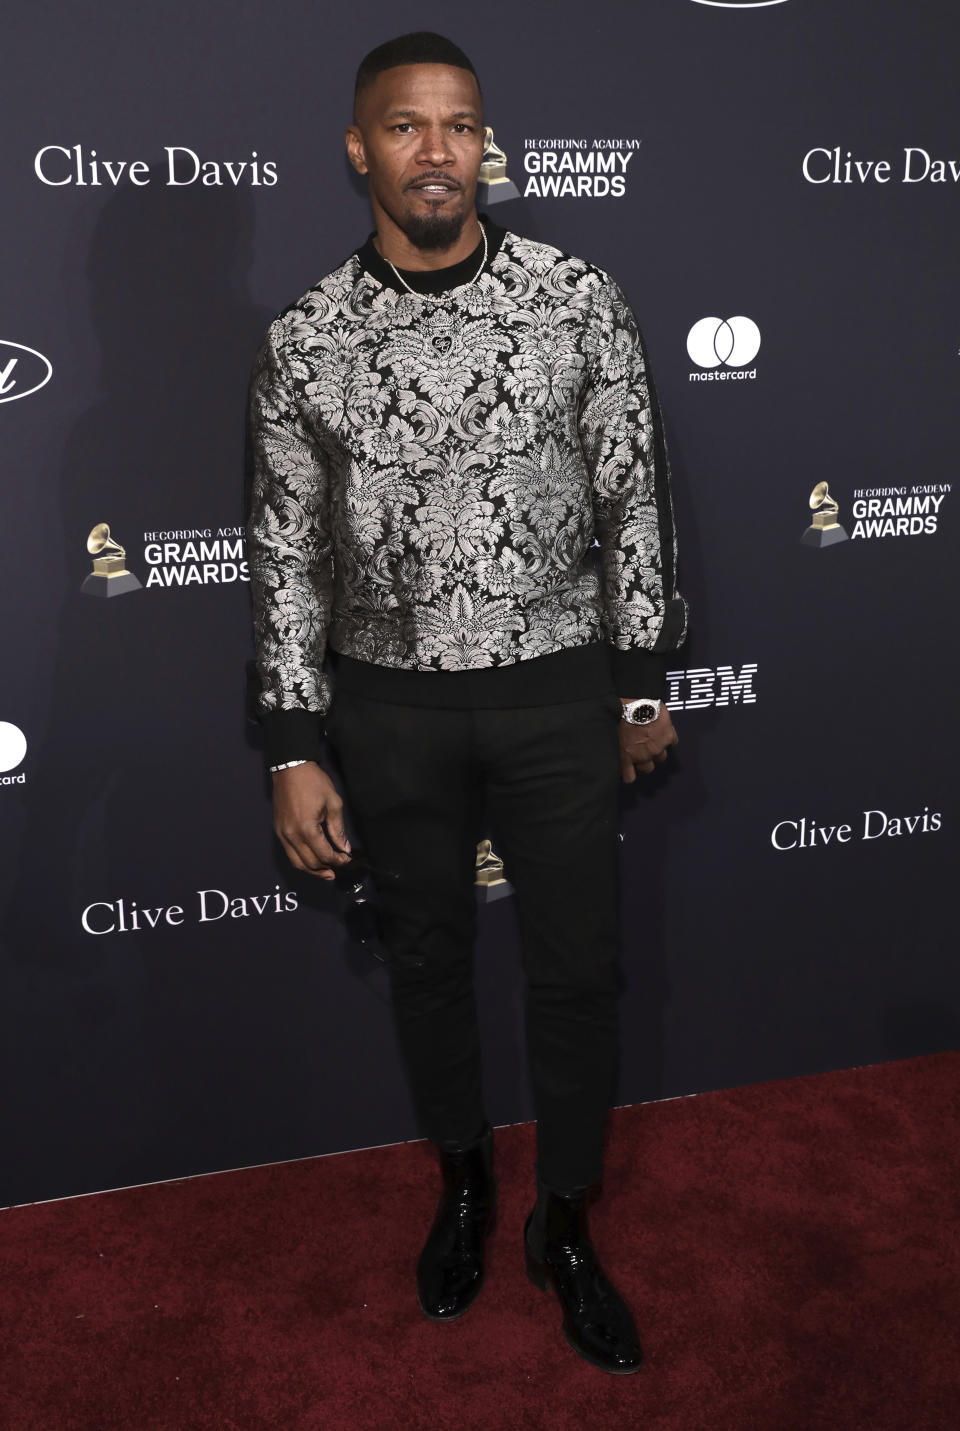 Jamie Foxx arrives at the Pre-Grammy Gala And Salute To Industry Icons at the Beverly Hilton Hotel on Saturday, Jan. 25, 2020, in Beverly Hills, Calif. (Photo by Mark Von Holden/Invision/AP)